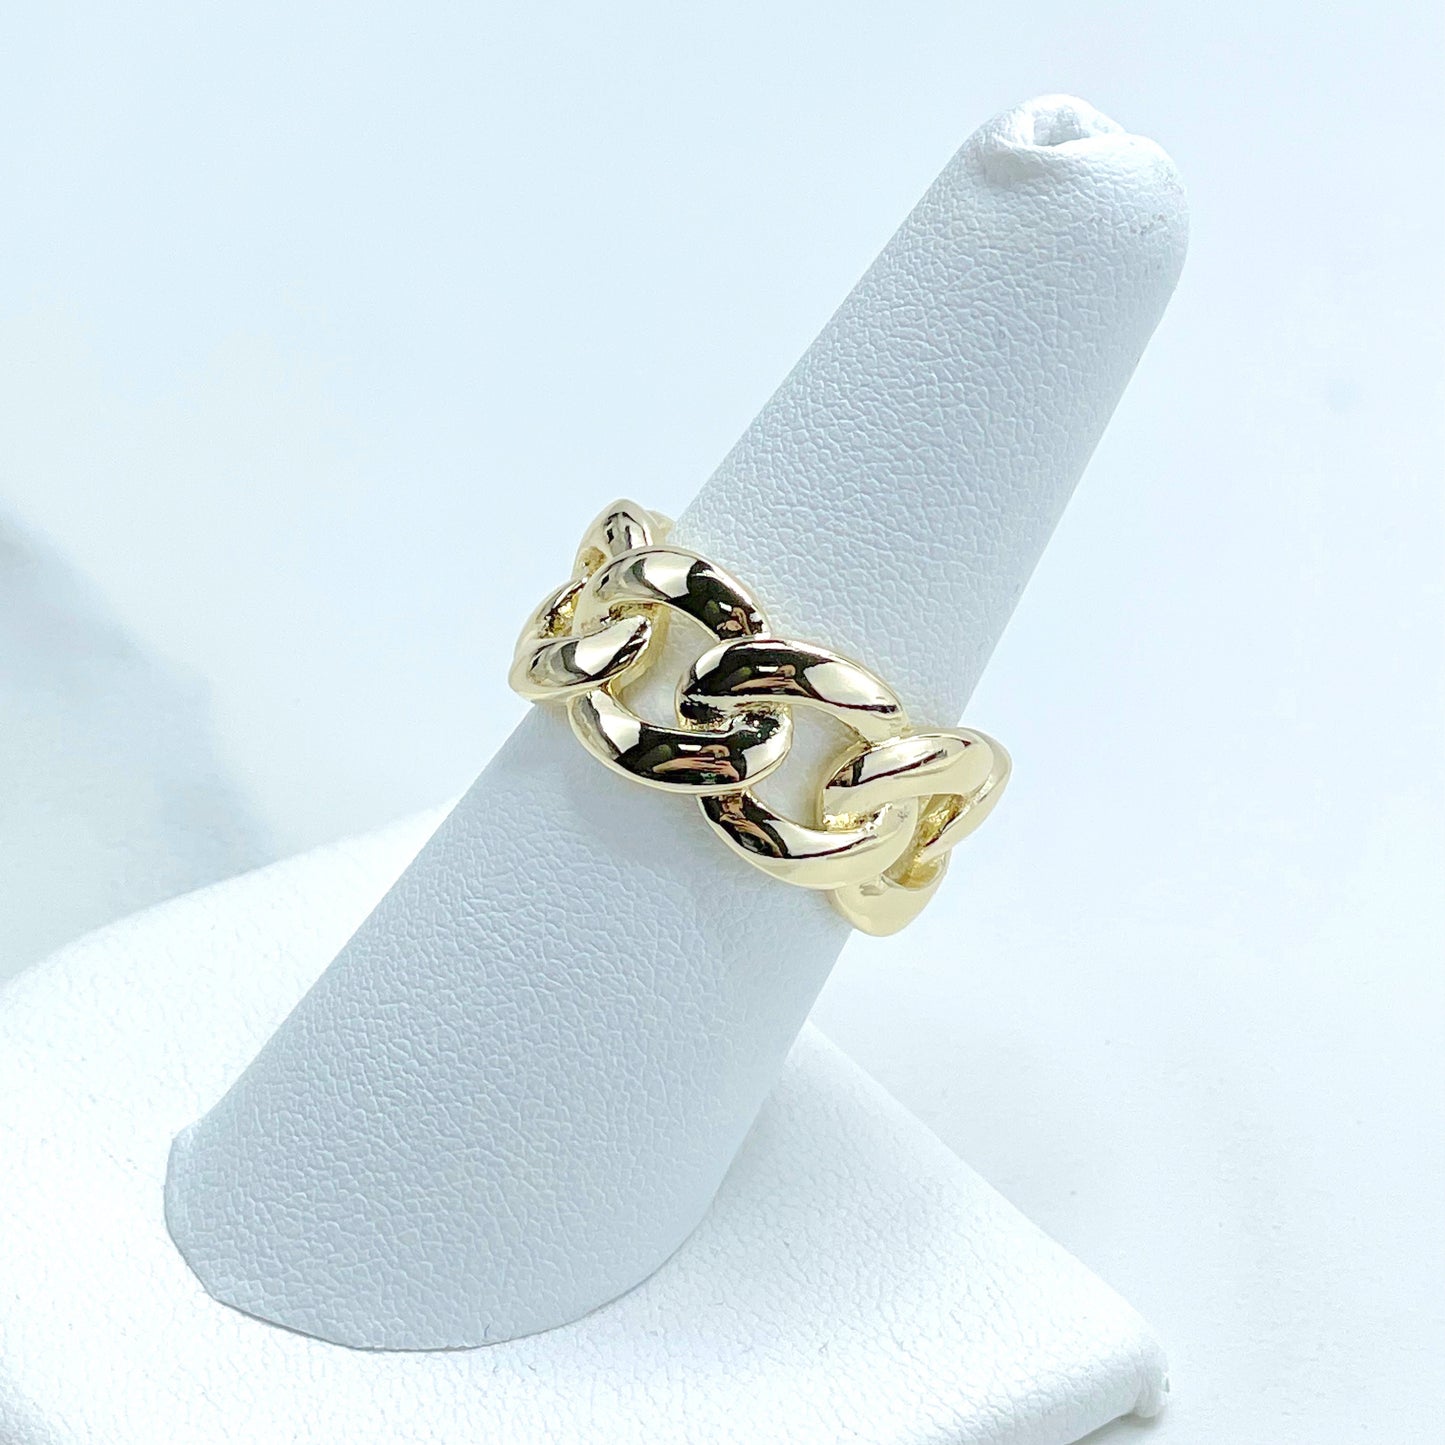 18k Gold Filled 10.5mm Curb Link Ring, Gold or Silver, Wholesale Jewelry Making Supplies